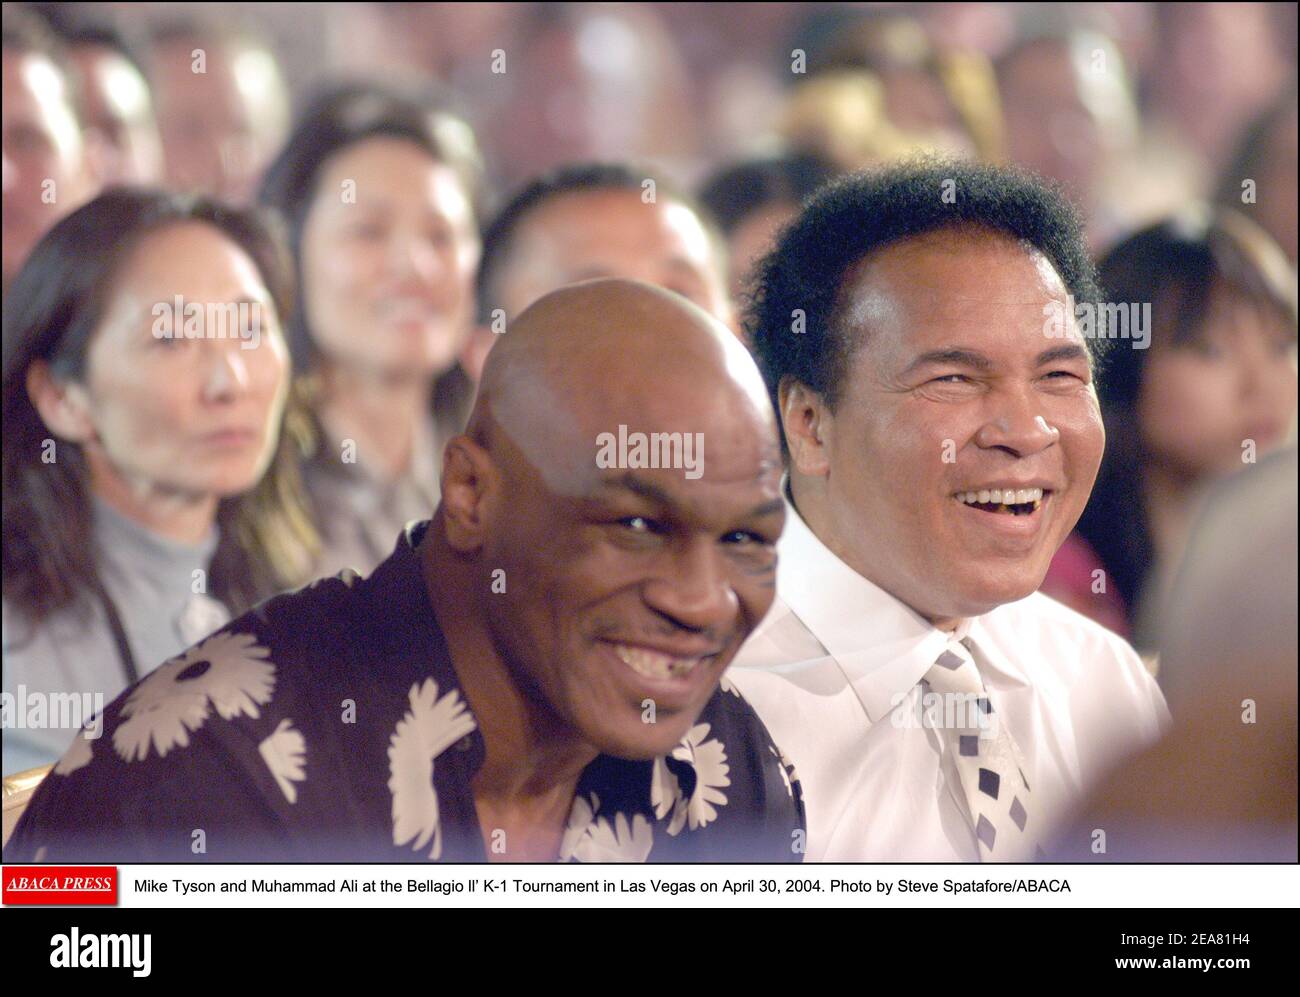 Mike Tyson And Muhammad Ali At The Bellagio Ll K 1 Tournament In Las Vegas On April 30 04 Photo By Steve Spatafore Abaca Stock Photo Alamy